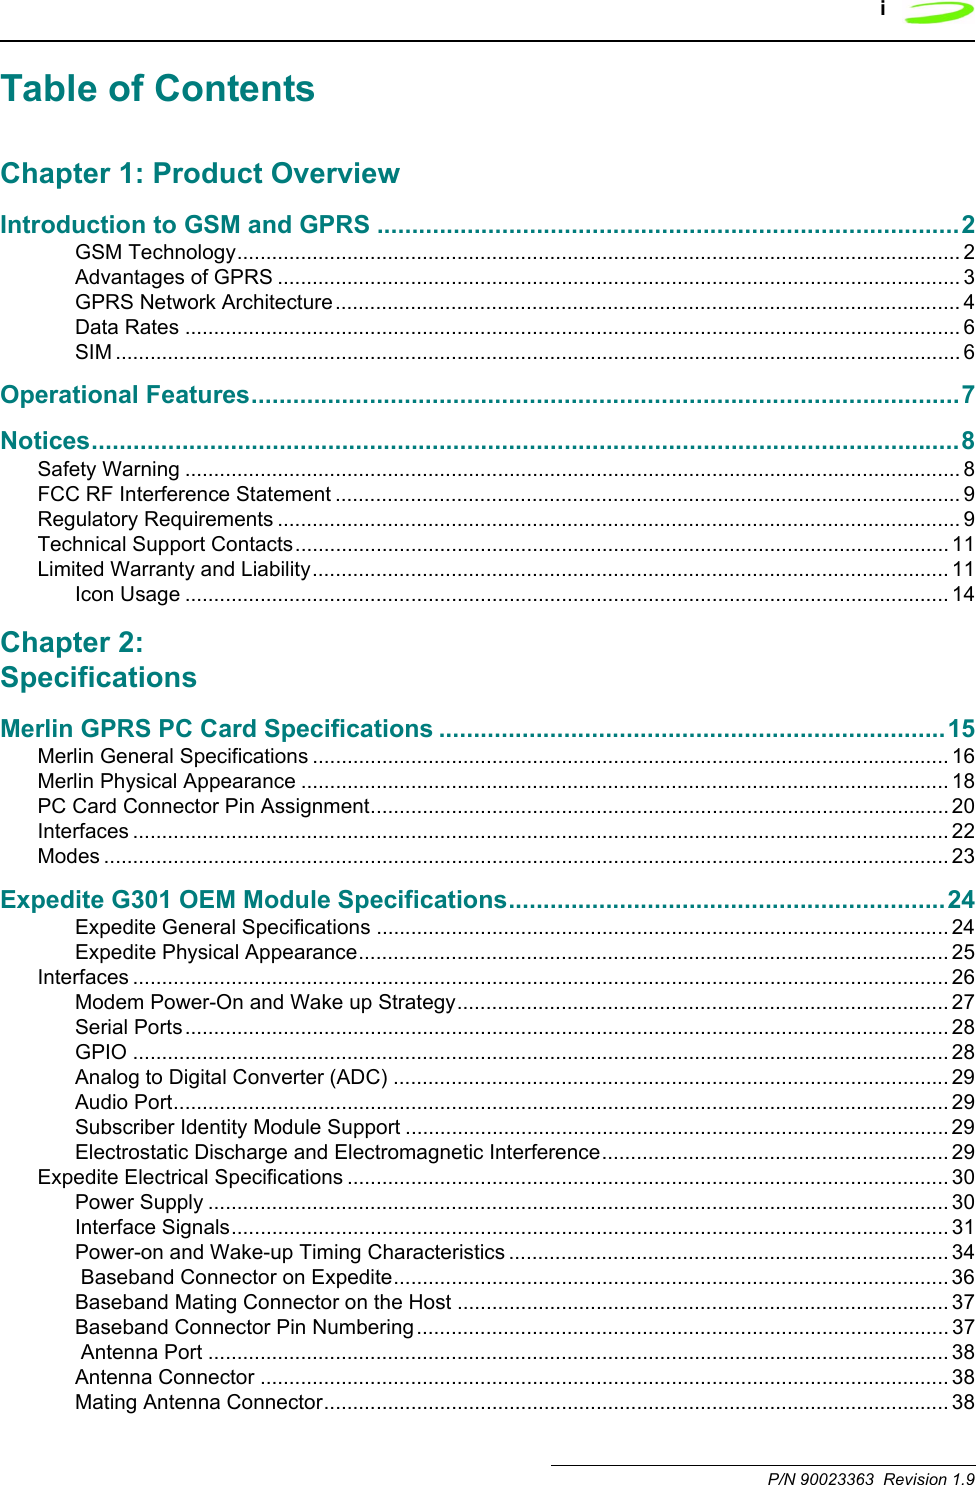 i P/N 90023363  Revision 1.9Table of ContentsChapter 1: Product OverviewIntroduction to GSM and GPRS ....................................................................................2GSM Technology............................................................................................................................. 2Advantages of GPRS ...................................................................................................................... 3GPRS Network Architecture............................................................................................................ 4Data Rates ...................................................................................................................................... 6SIM .................................................................................................................................................. 6Operational Features......................................................................................................7Notices.............................................................................................................................8Safety Warning ...................................................................................................................................... 8FCC RF Interference Statement ............................................................................................................ 9Regulatory Requirements ...................................................................................................................... 9Technical Support Contacts................................................................................................................. 11Limited Warranty and Liability.............................................................................................................. 11Icon Usage .................................................................................................................................... 14Chapter 2: SpecificationsMerlin GPRS PC Card Specifications .........................................................................15Merlin General Specifications .............................................................................................................. 16Merlin Physical Appearance ................................................................................................................ 18PC Card Connector Pin Assignment.................................................................................................... 20Interfaces ............................................................................................................................................. 22Modes .................................................................................................................................................. 23Expedite G301 OEM Module Specifications...............................................................24Expedite General Specifications ................................................................................................... 24Expedite Physical Appearance...................................................................................................... 25Interfaces ............................................................................................................................................. 26Modem Power-On and Wake up Strategy..................................................................................... 27Serial Ports.................................................................................................................................... 28GPIO ............................................................................................................................................. 28Analog to Digital Converter (ADC) ................................................................................................ 29Audio Port...................................................................................................................................... 29Subscriber Identity Module Support ..............................................................................................29Electrostatic Discharge and Electromagnetic Interference............................................................ 29Expedite Electrical Specifications ........................................................................................................ 30Power Supply ................................................................................................................................ 30Interface Signals............................................................................................................................ 31Power-on and Wake-up Timing Characteristics ............................................................................ 34 Baseband Connector on Expedite................................................................................................ 36Baseband Mating Connector on the Host ..................................................................................... 37Baseband Connector Pin Numbering............................................................................................ 37 Antenna Port ................................................................................................................................ 38Antenna Connector ....................................................................................................................... 38Mating Antenna Connector............................................................................................................ 38